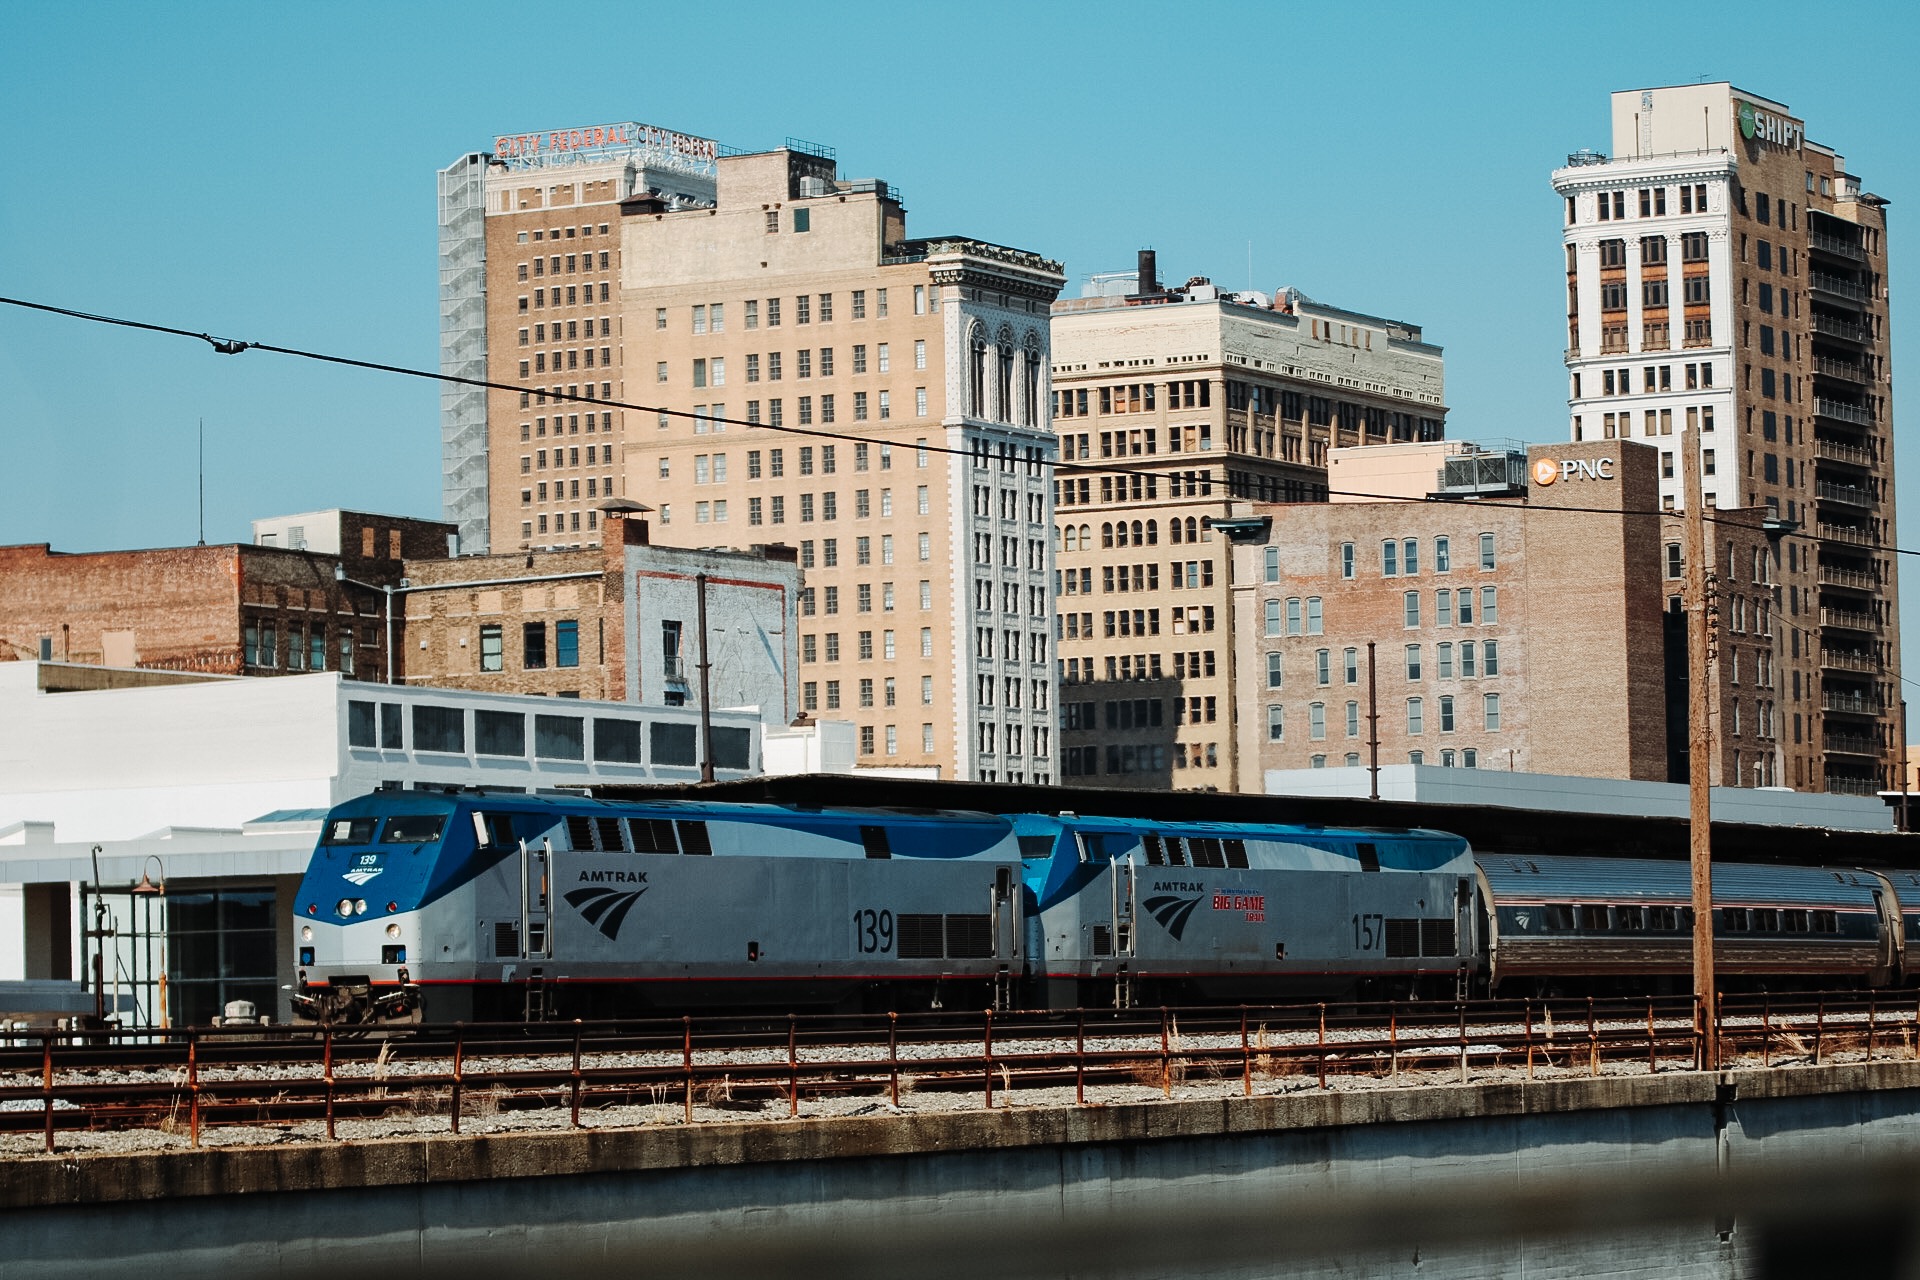 Train 2 7 takeaways from 1,671 responses to Bham Now's July 2020 survey